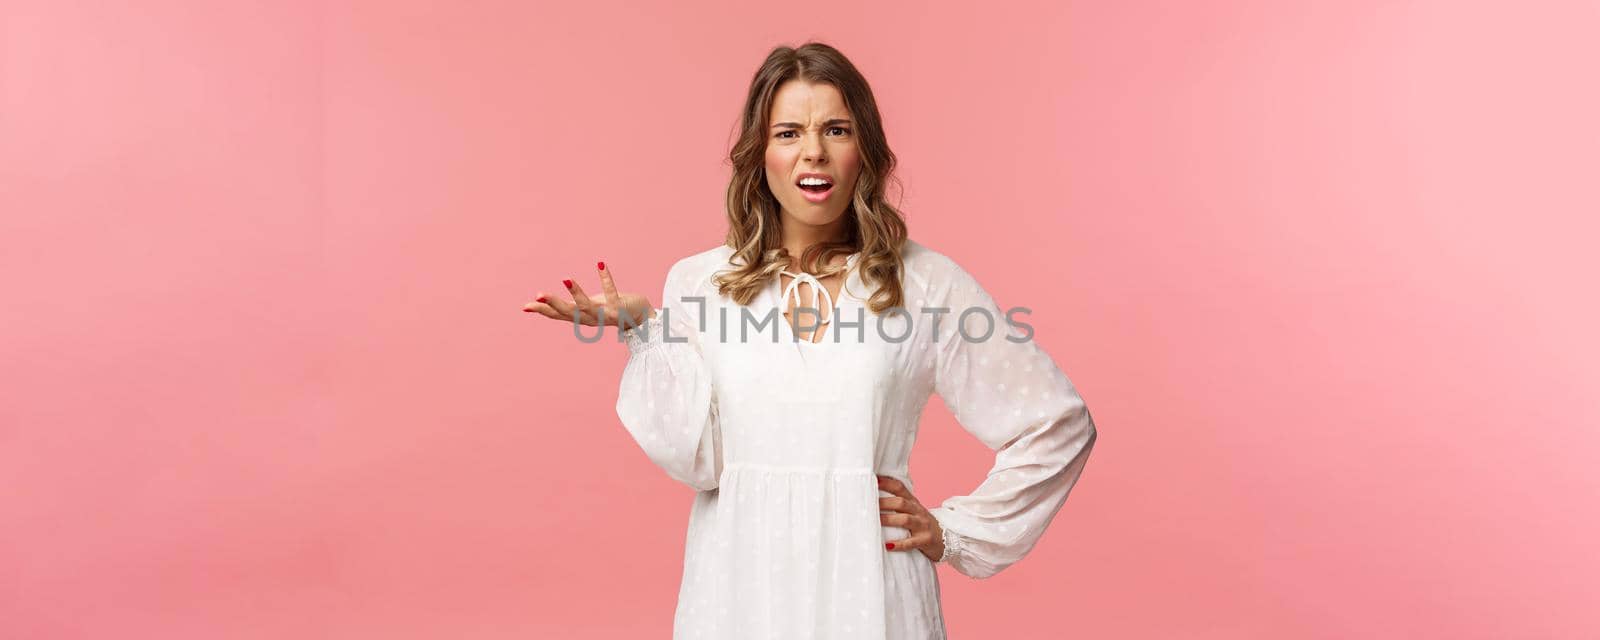 Whats your problem. Pissed-off and annoyed young blond girl looking questioned, cant understand what person complain about, raise on hand in dismay, shrug and grimace puzzled, pink background.